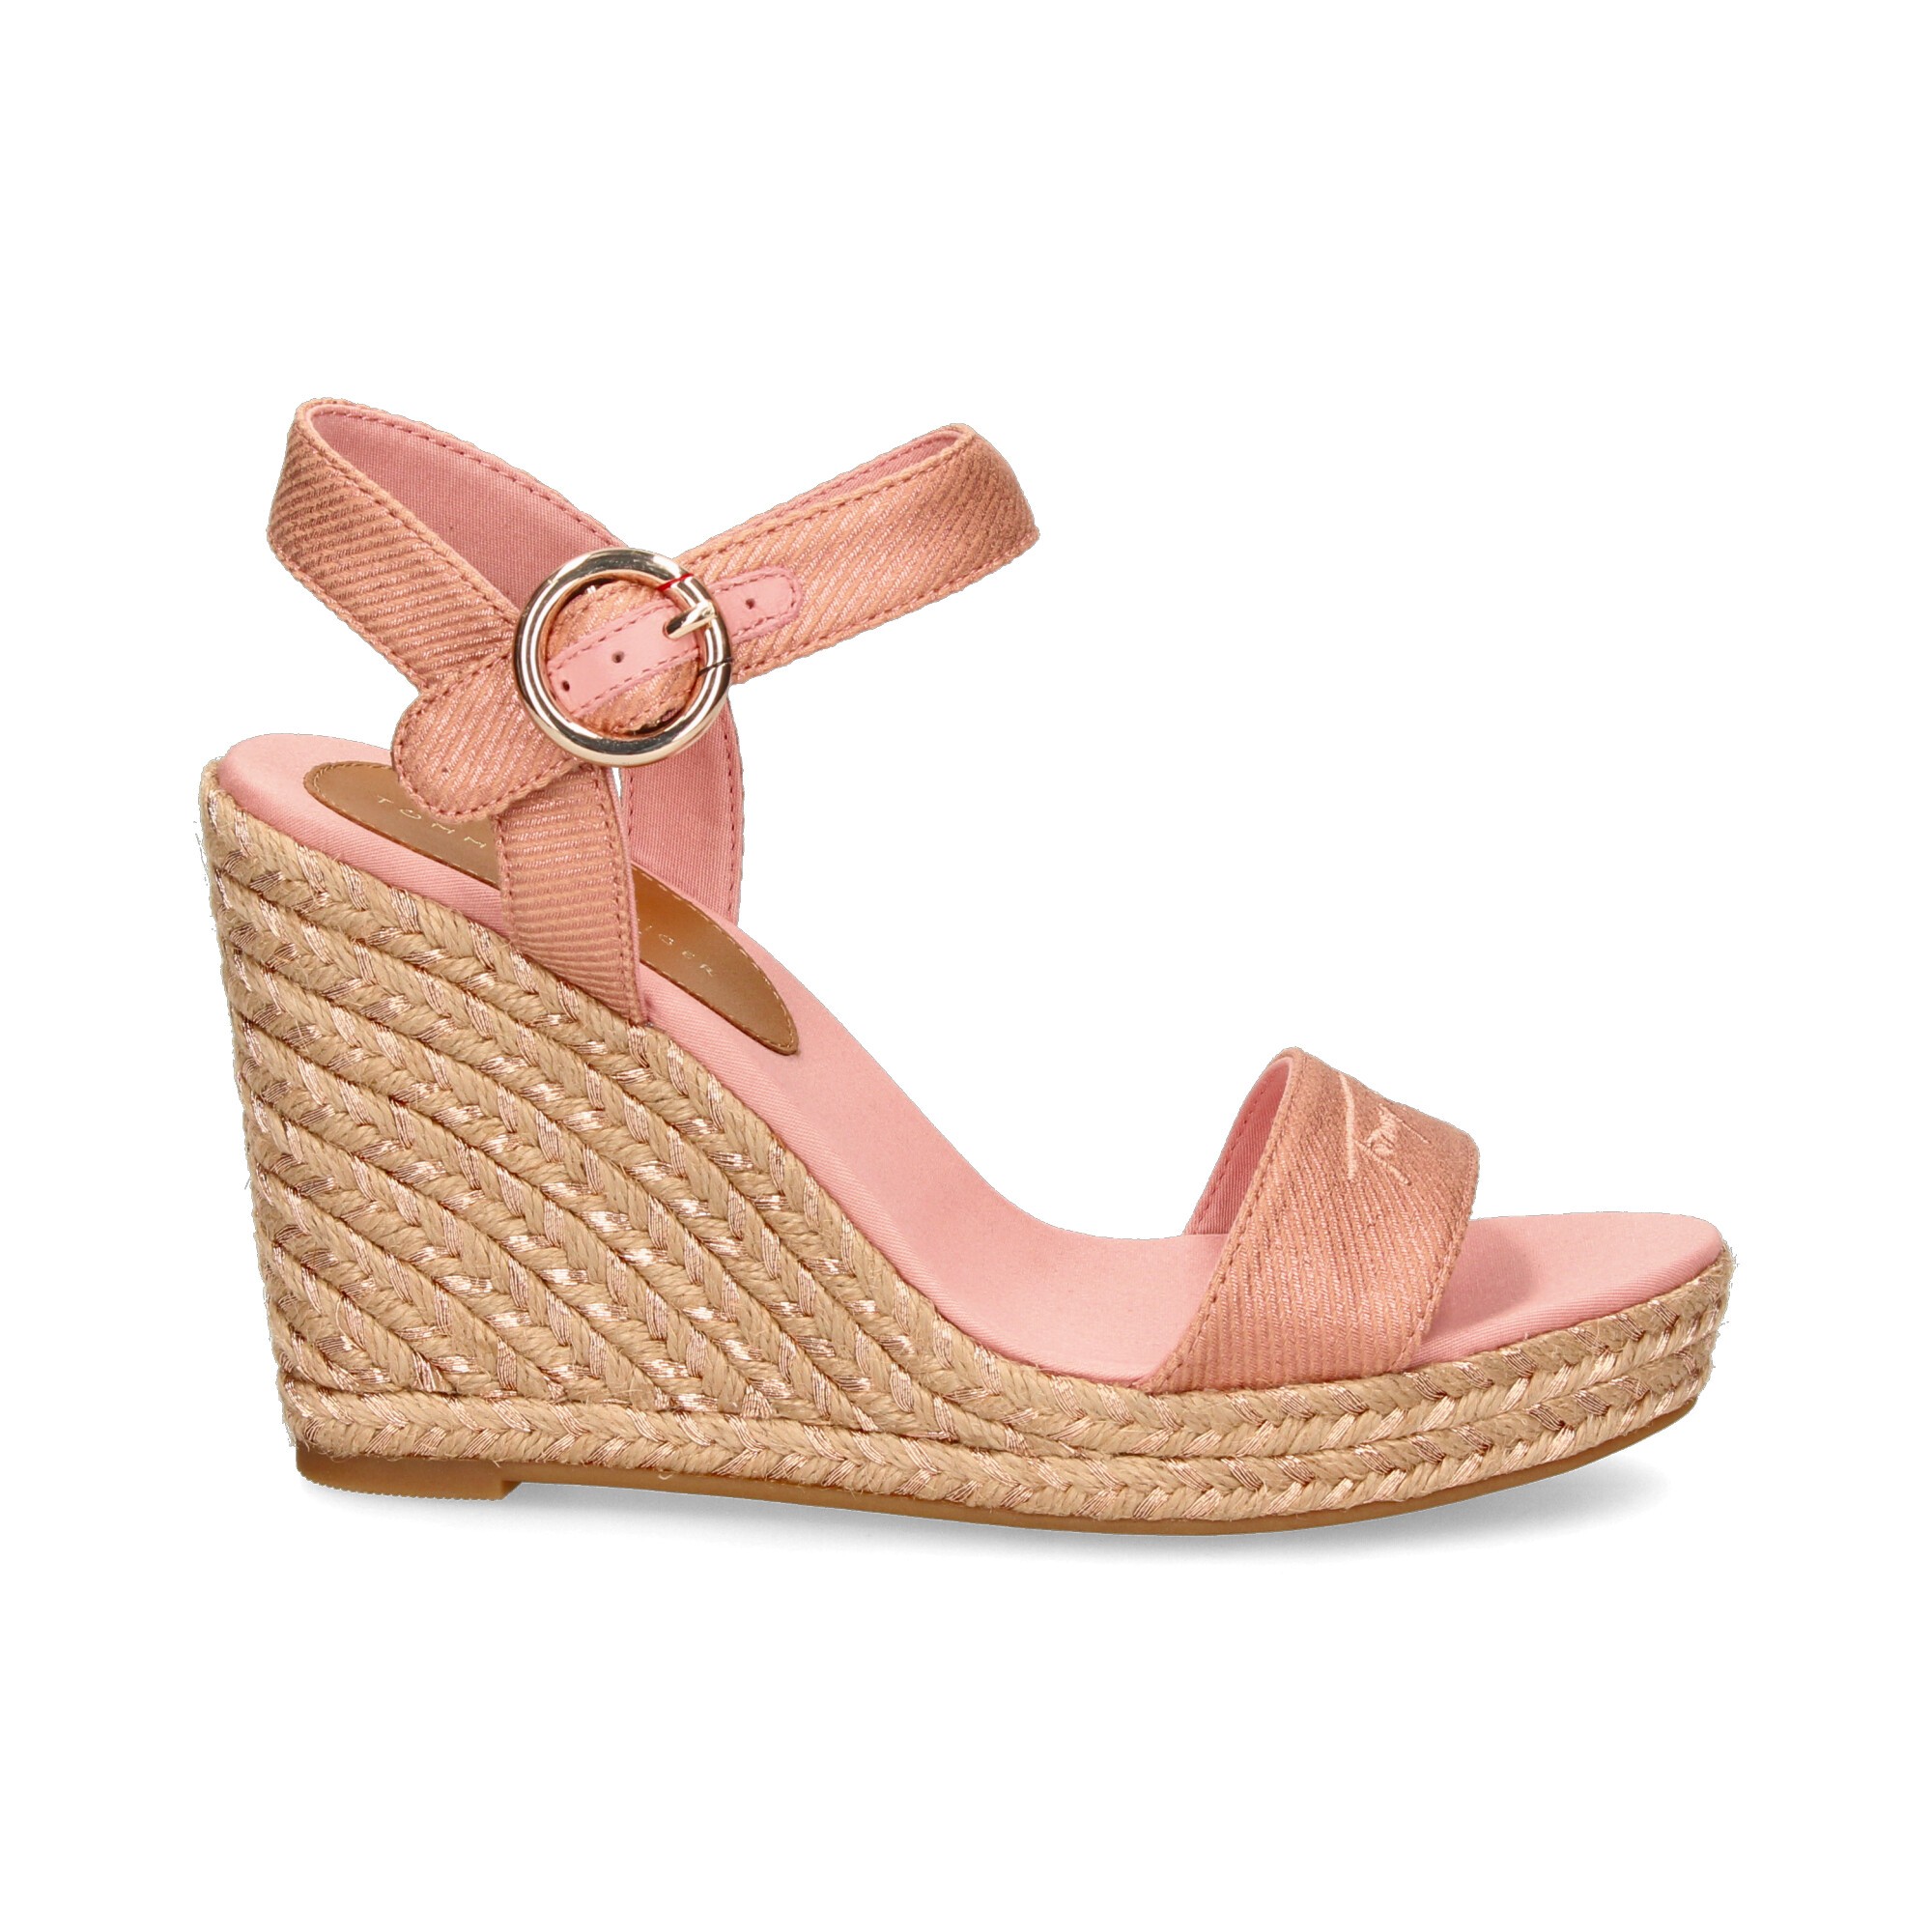 terning Sovesal Hovedsagelig TOMMY HILFIGER Women's wedge sandals FW0FW05613 TQS SOOTHING PI